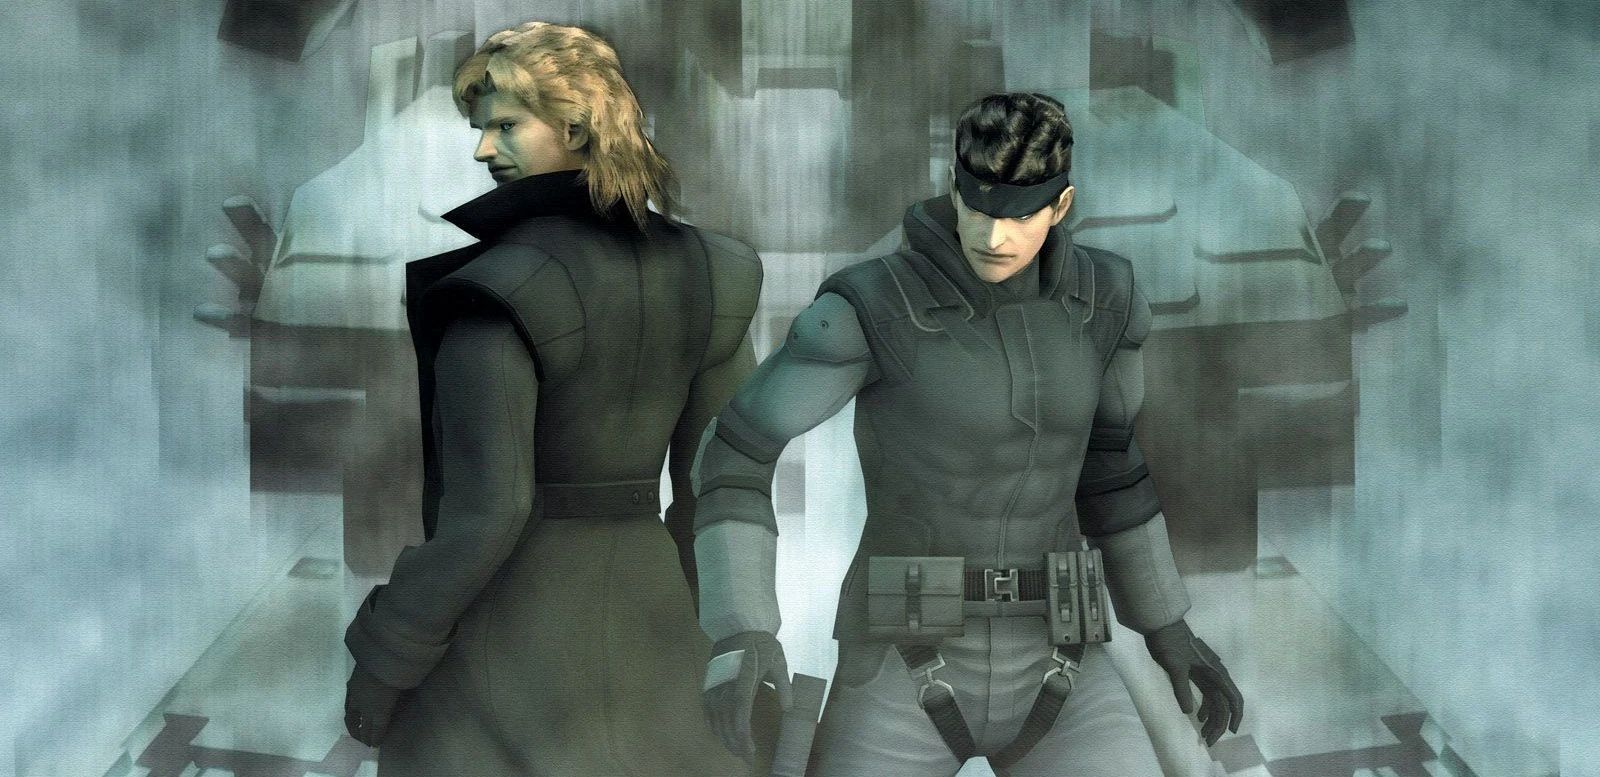 Snake and solidus in front of metal gear 